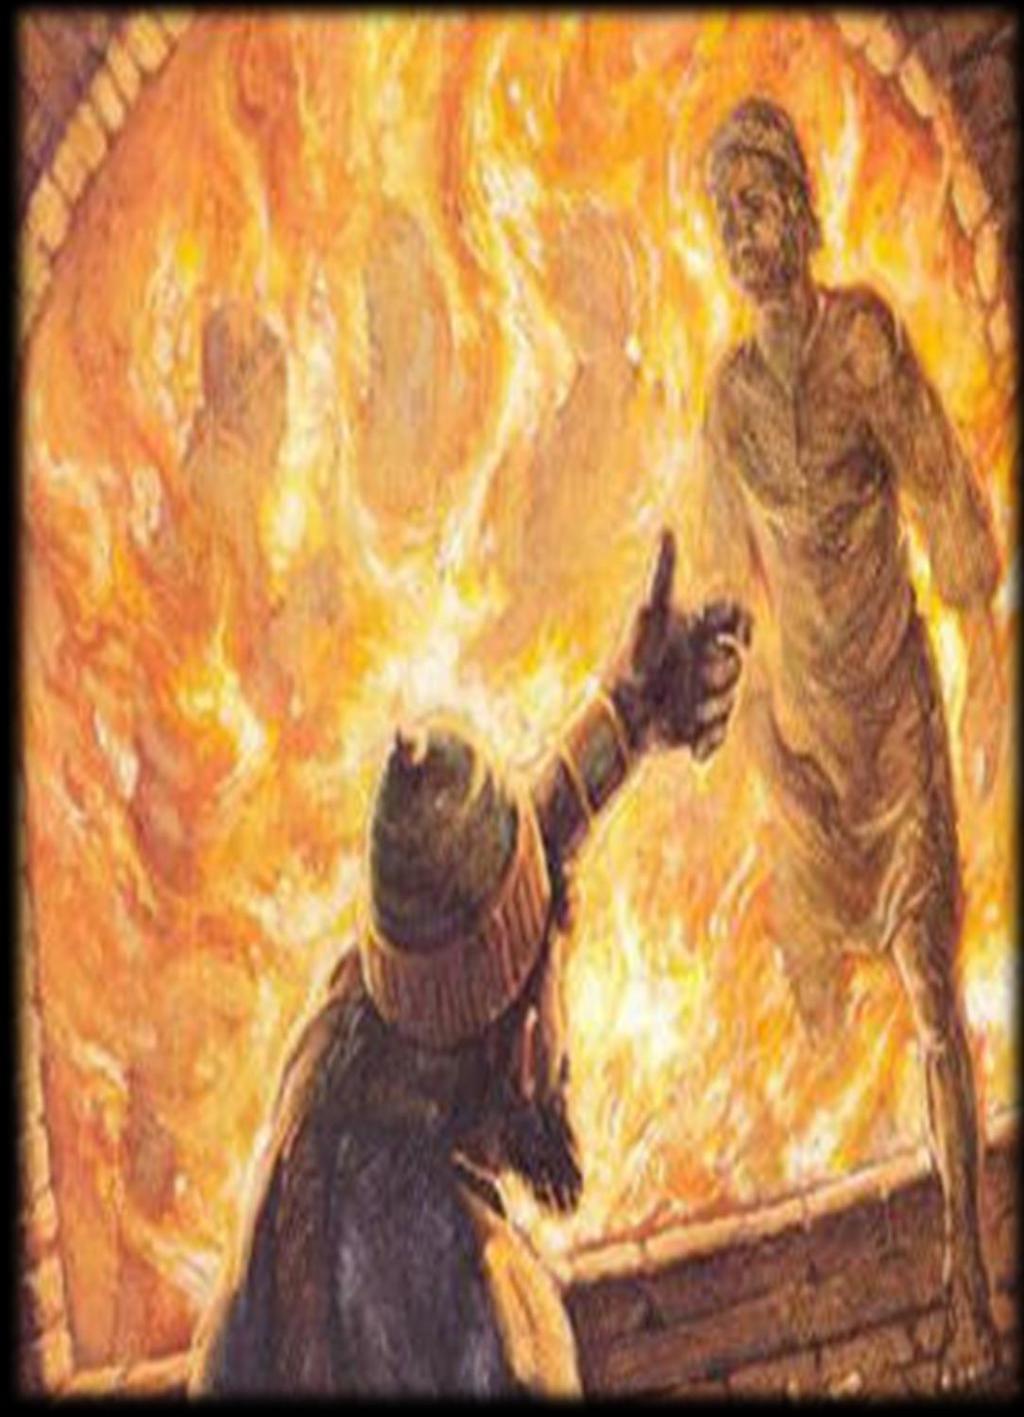 The king personally called the servants of God from the fiery flame.